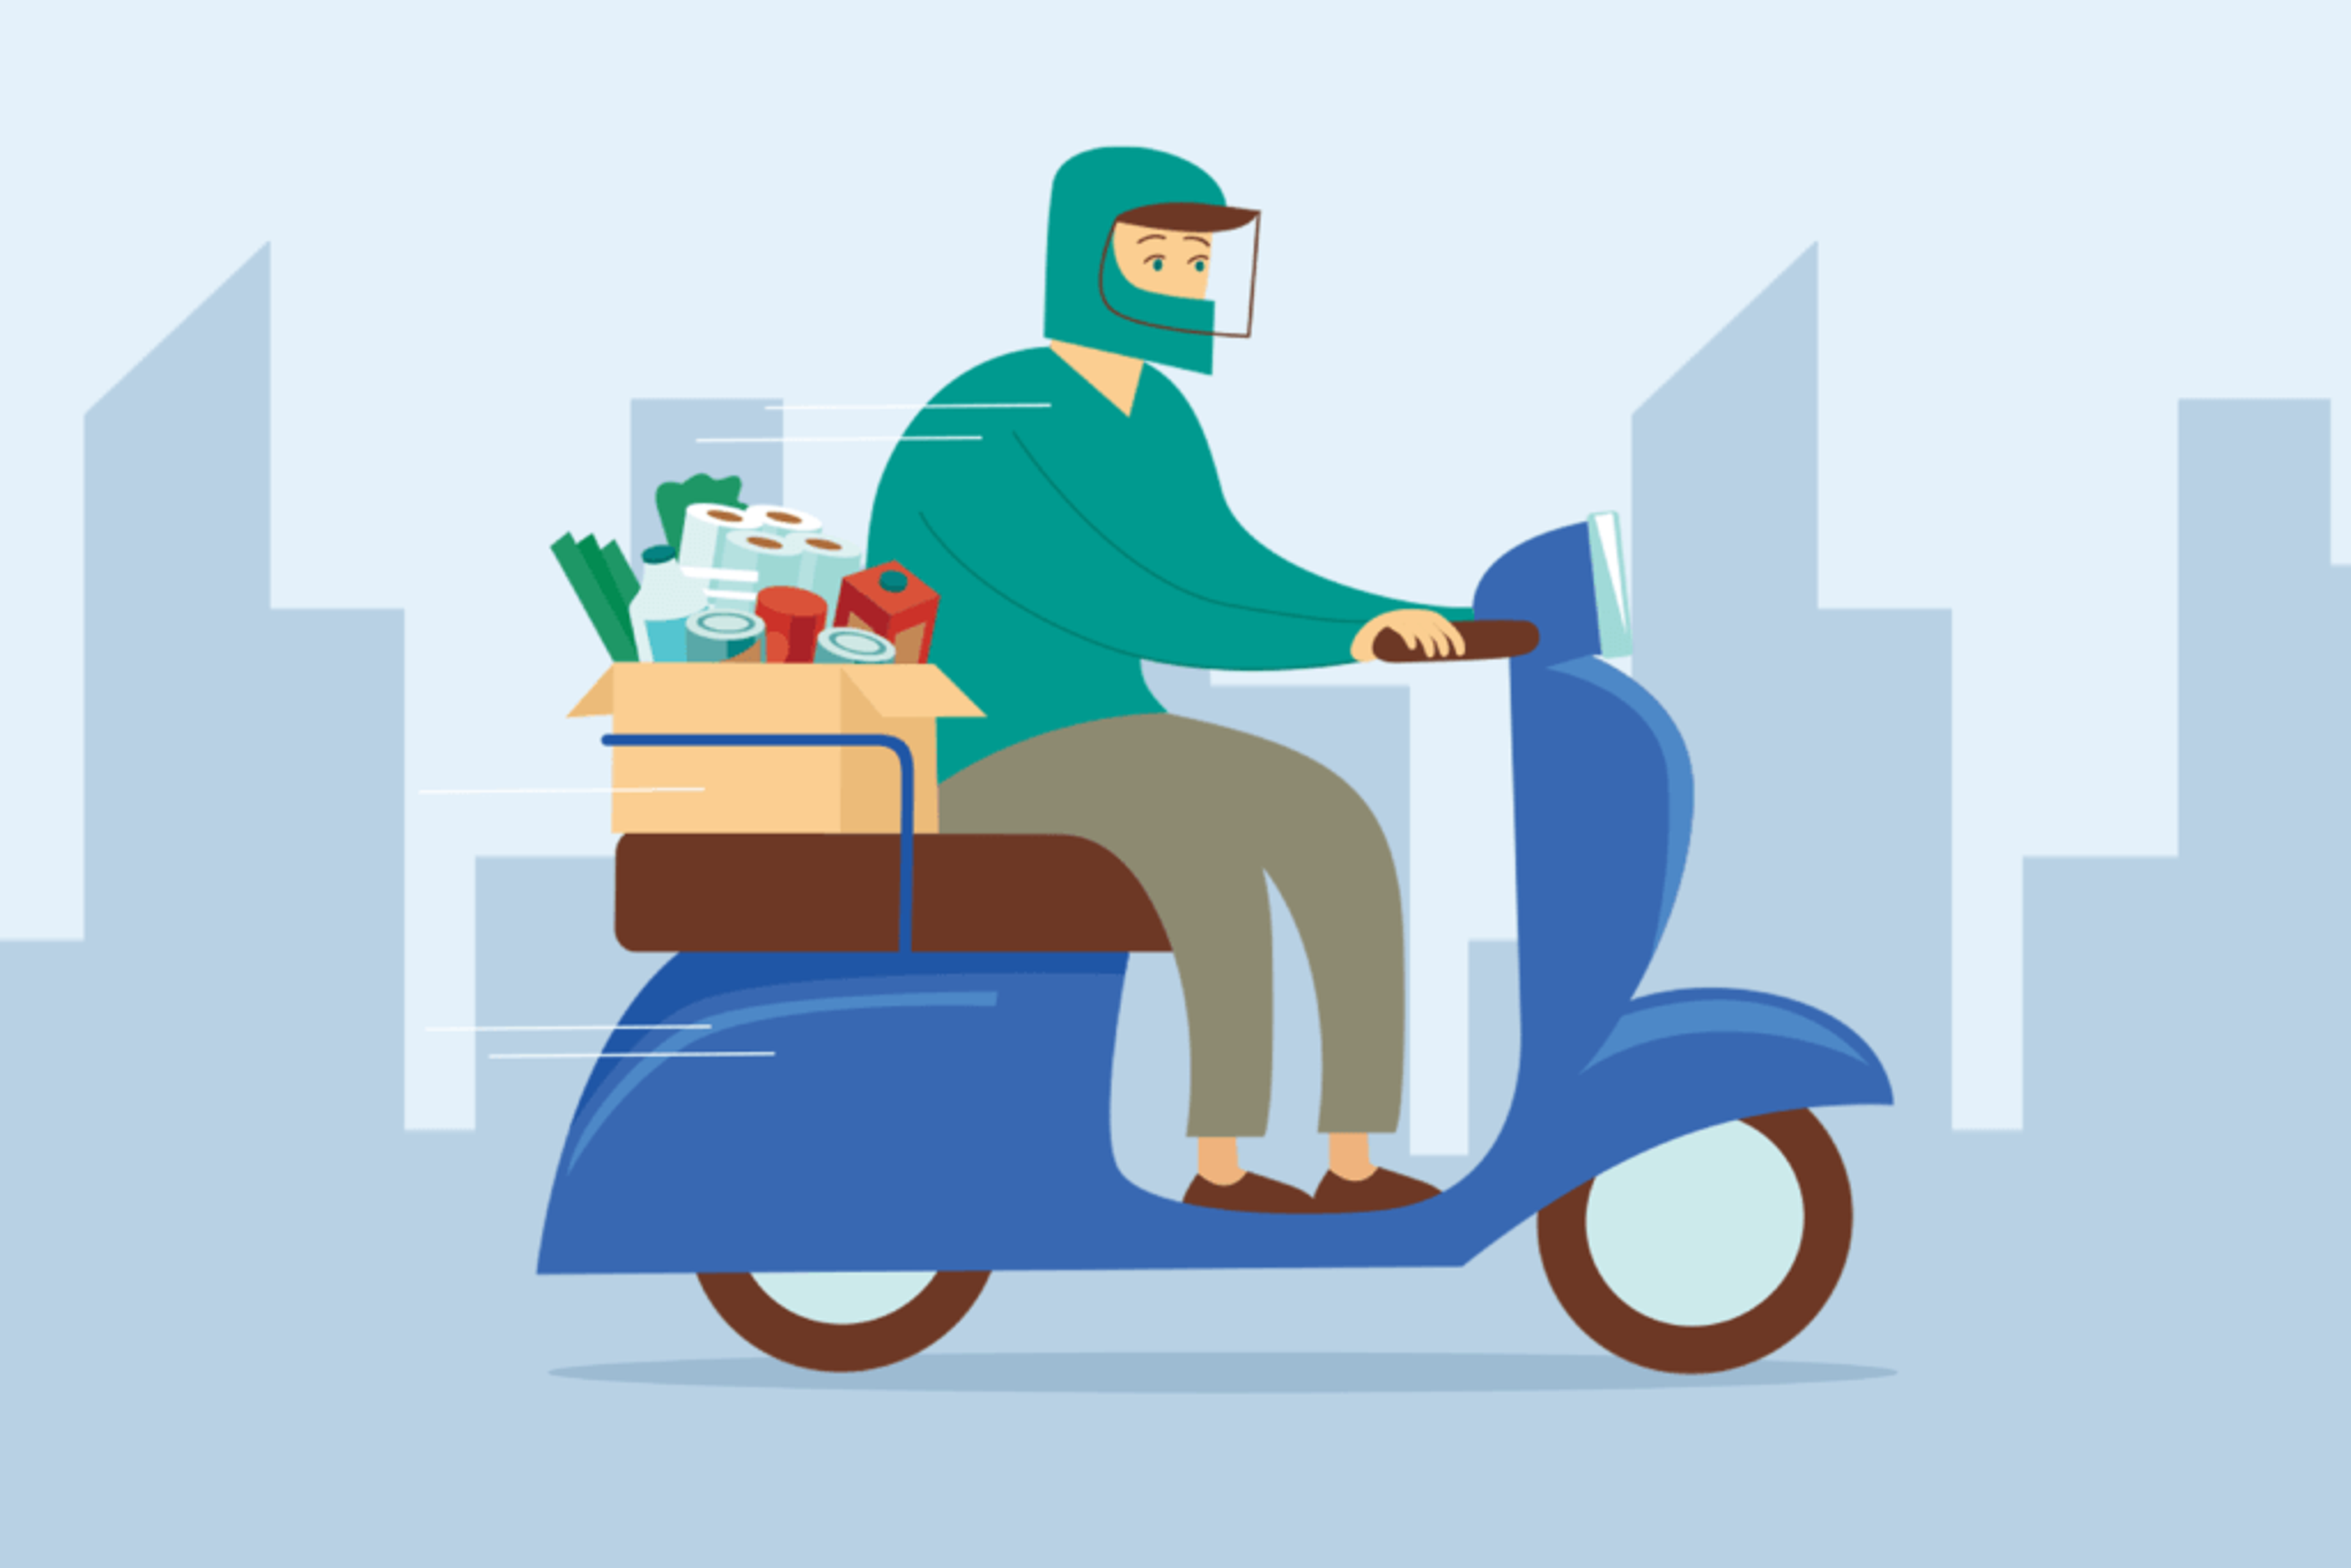 Meal Delivery Trends: Which Meal Delivery Services Are Most Popular in 2022?